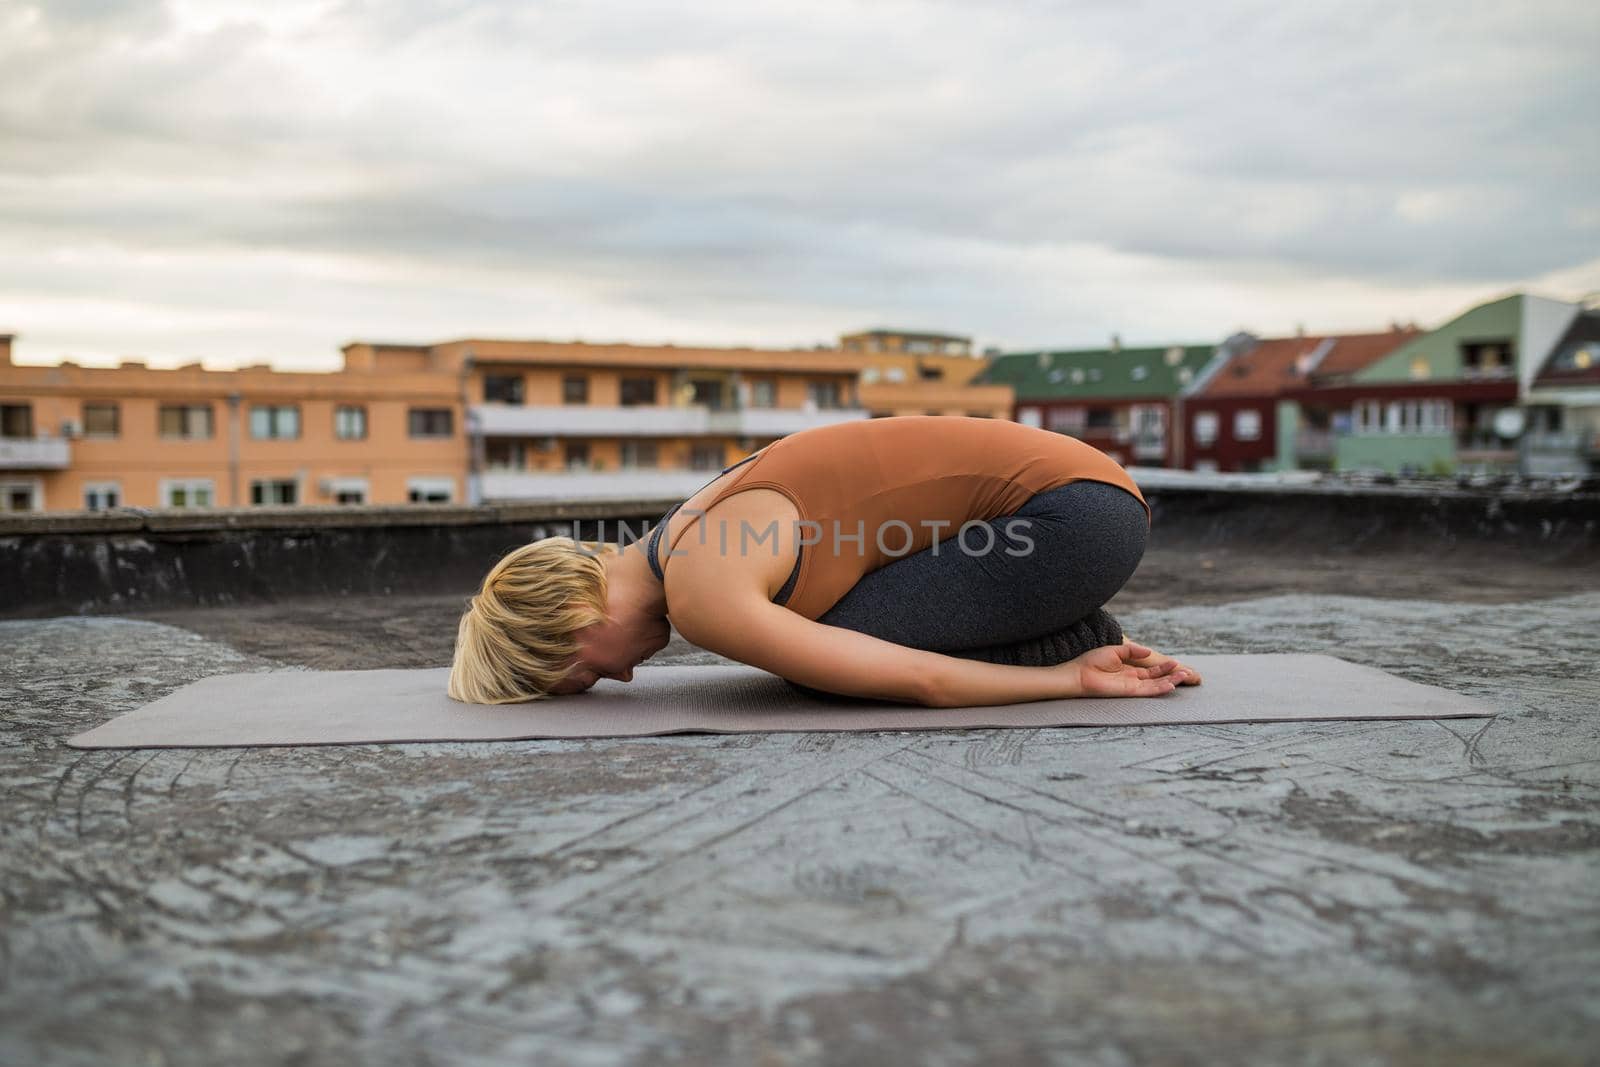 Woman practicing yoga on the roof by Bazdar